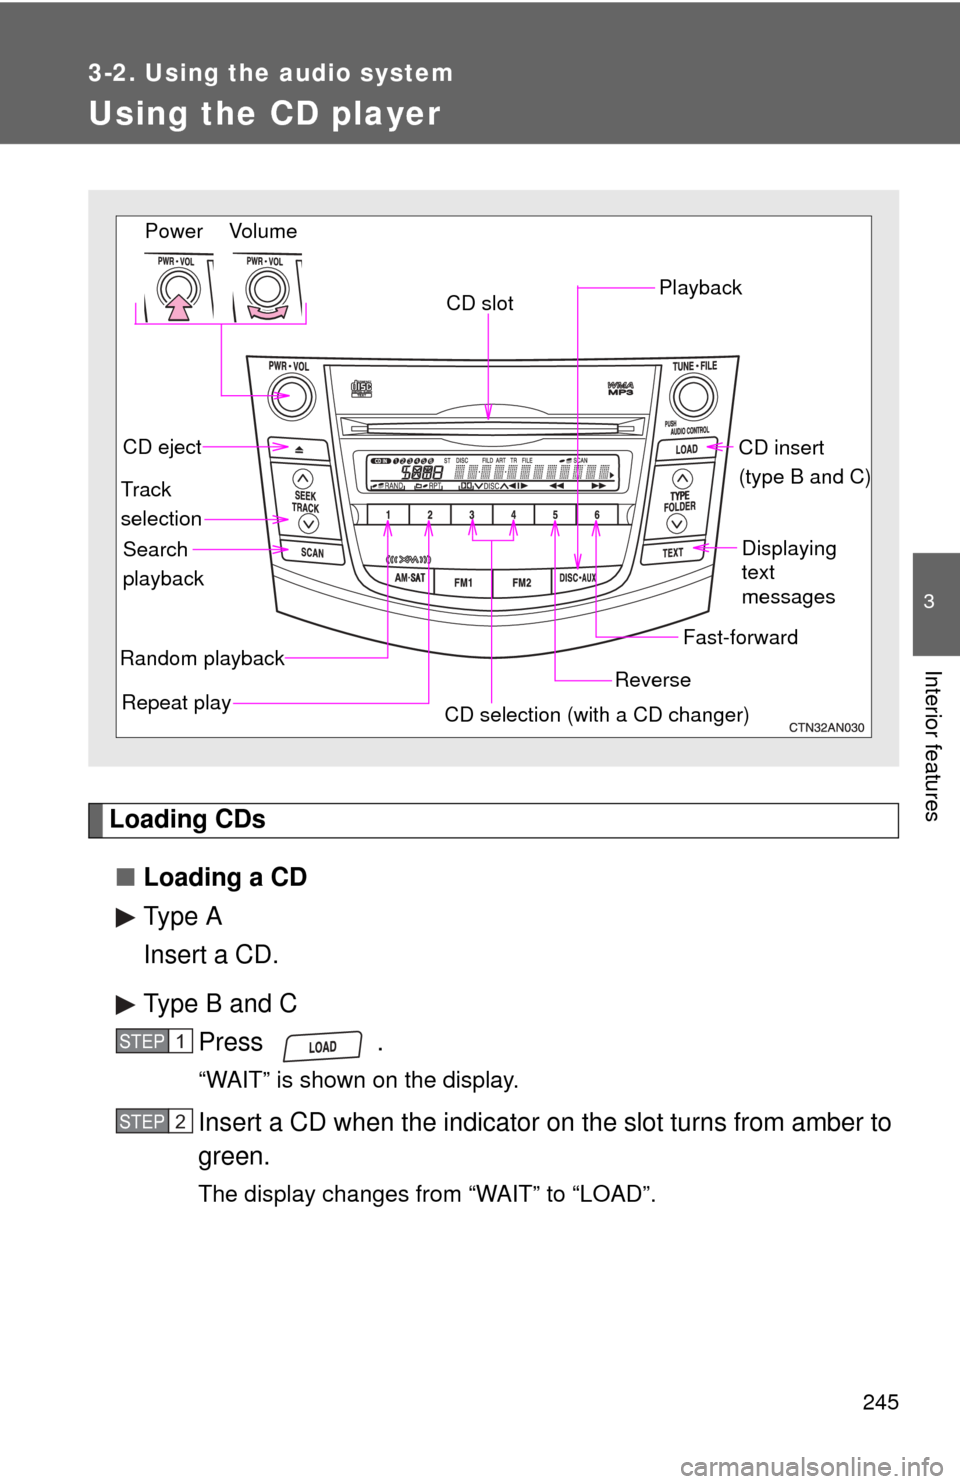 TOYOTA RAV4 2010 XA30 / 3.G Owners Manual 245
3-2. Using the audio system
3
Interior features
Using the CD player
Loading CDs■ Loading a CD
Type A
Insert a CD.
Type B and C
Press .
“WAIT” is shown on the display.
Insert a CD when the in